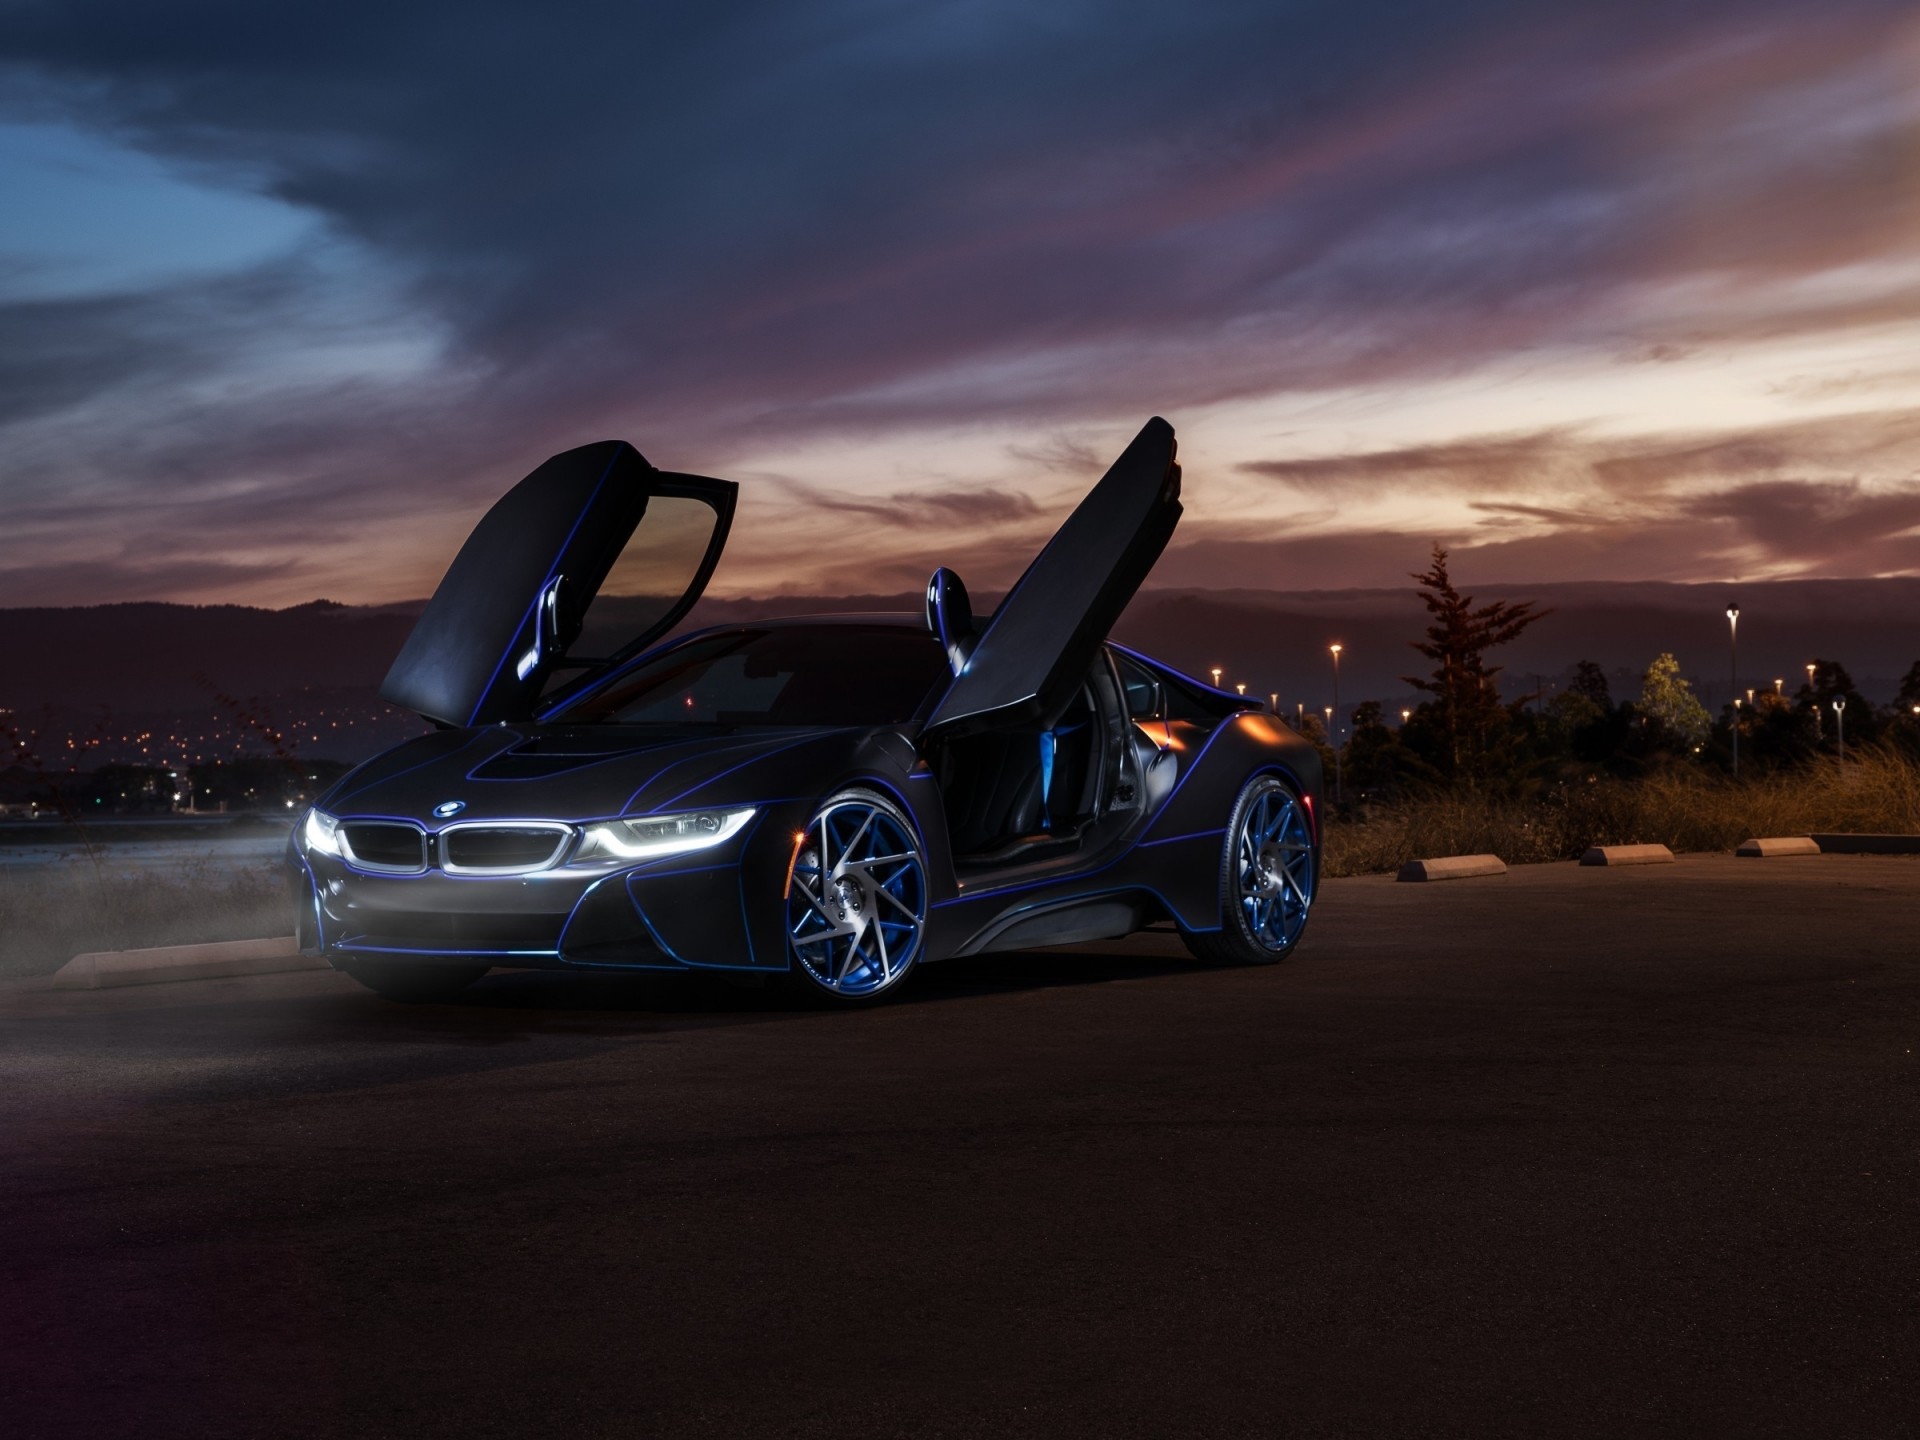 1920x1440 Modest Car Wallpaper For Android Tablet In Images P0ai With Car Wallpaper  For Free In Galleries